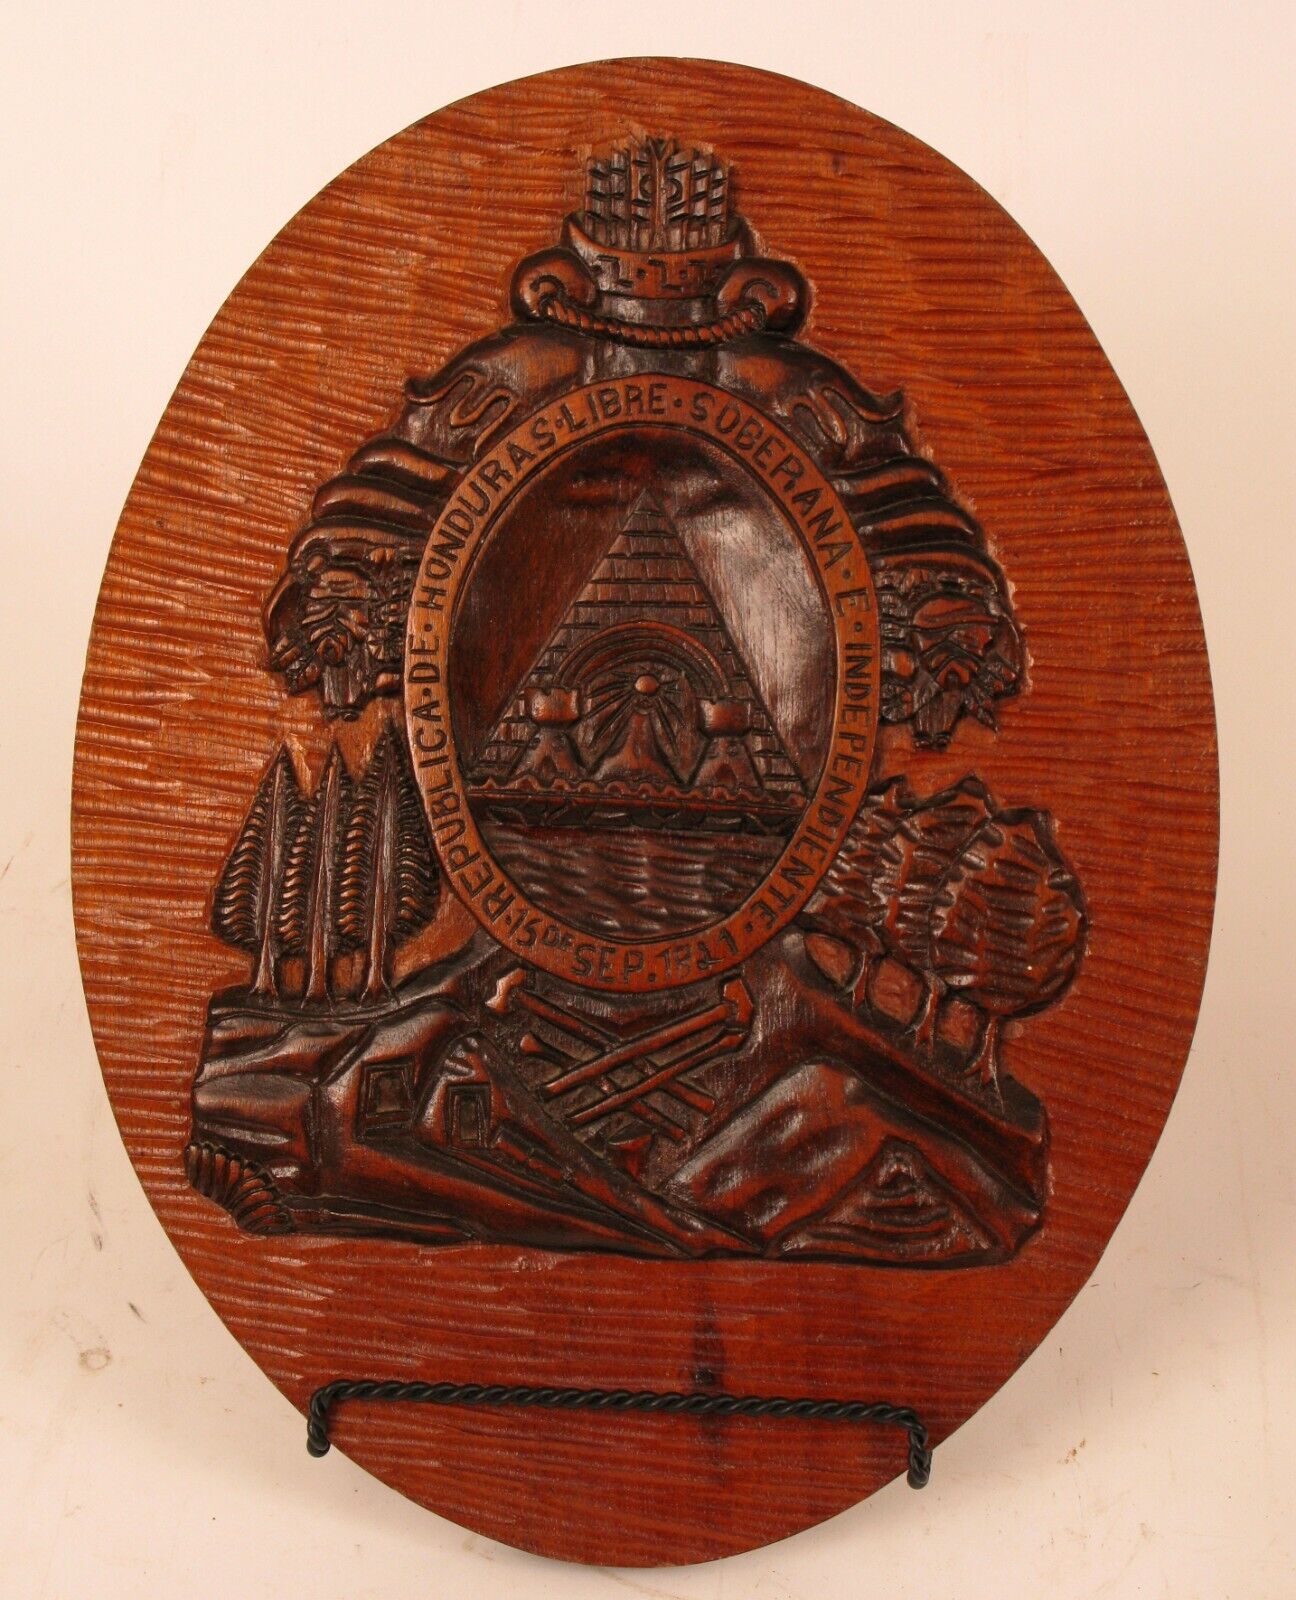 VINTAGE HONDURAS WOOD CARVED PICTURE HIGH RELIEF WALL PLAQUE DECOR RARE 